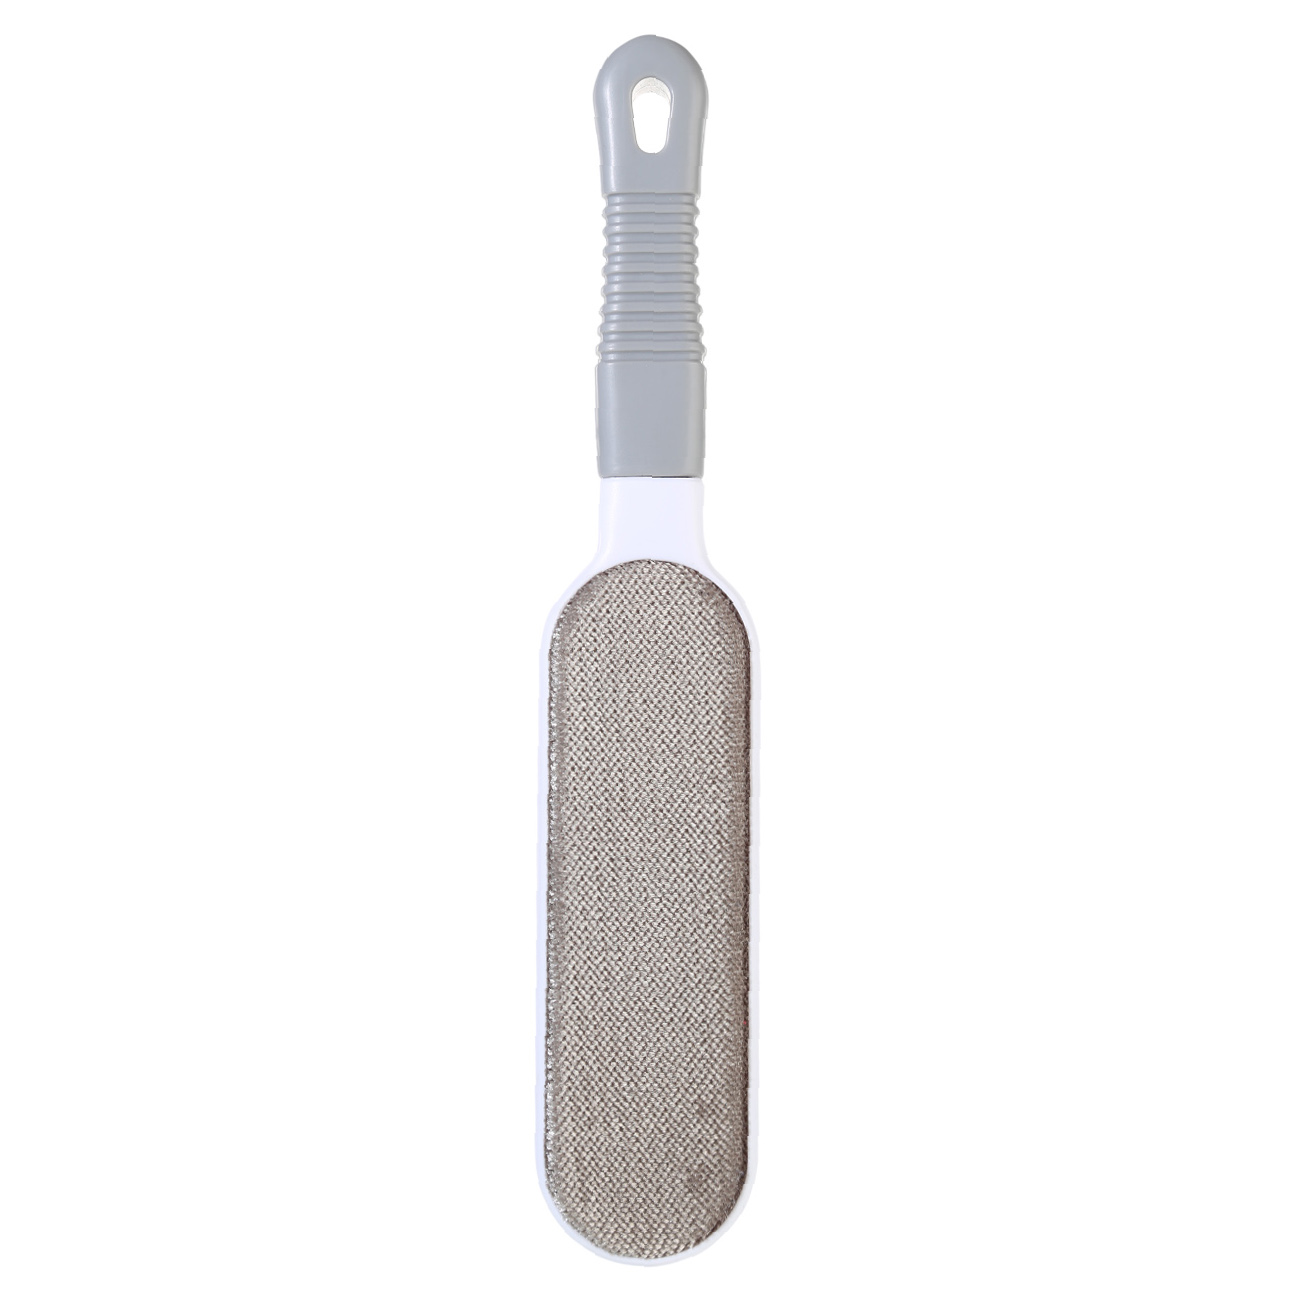 Wool cleaning brush, 31 cm, with cleaning container, Microfiber / plastic, Clean изображение № 2